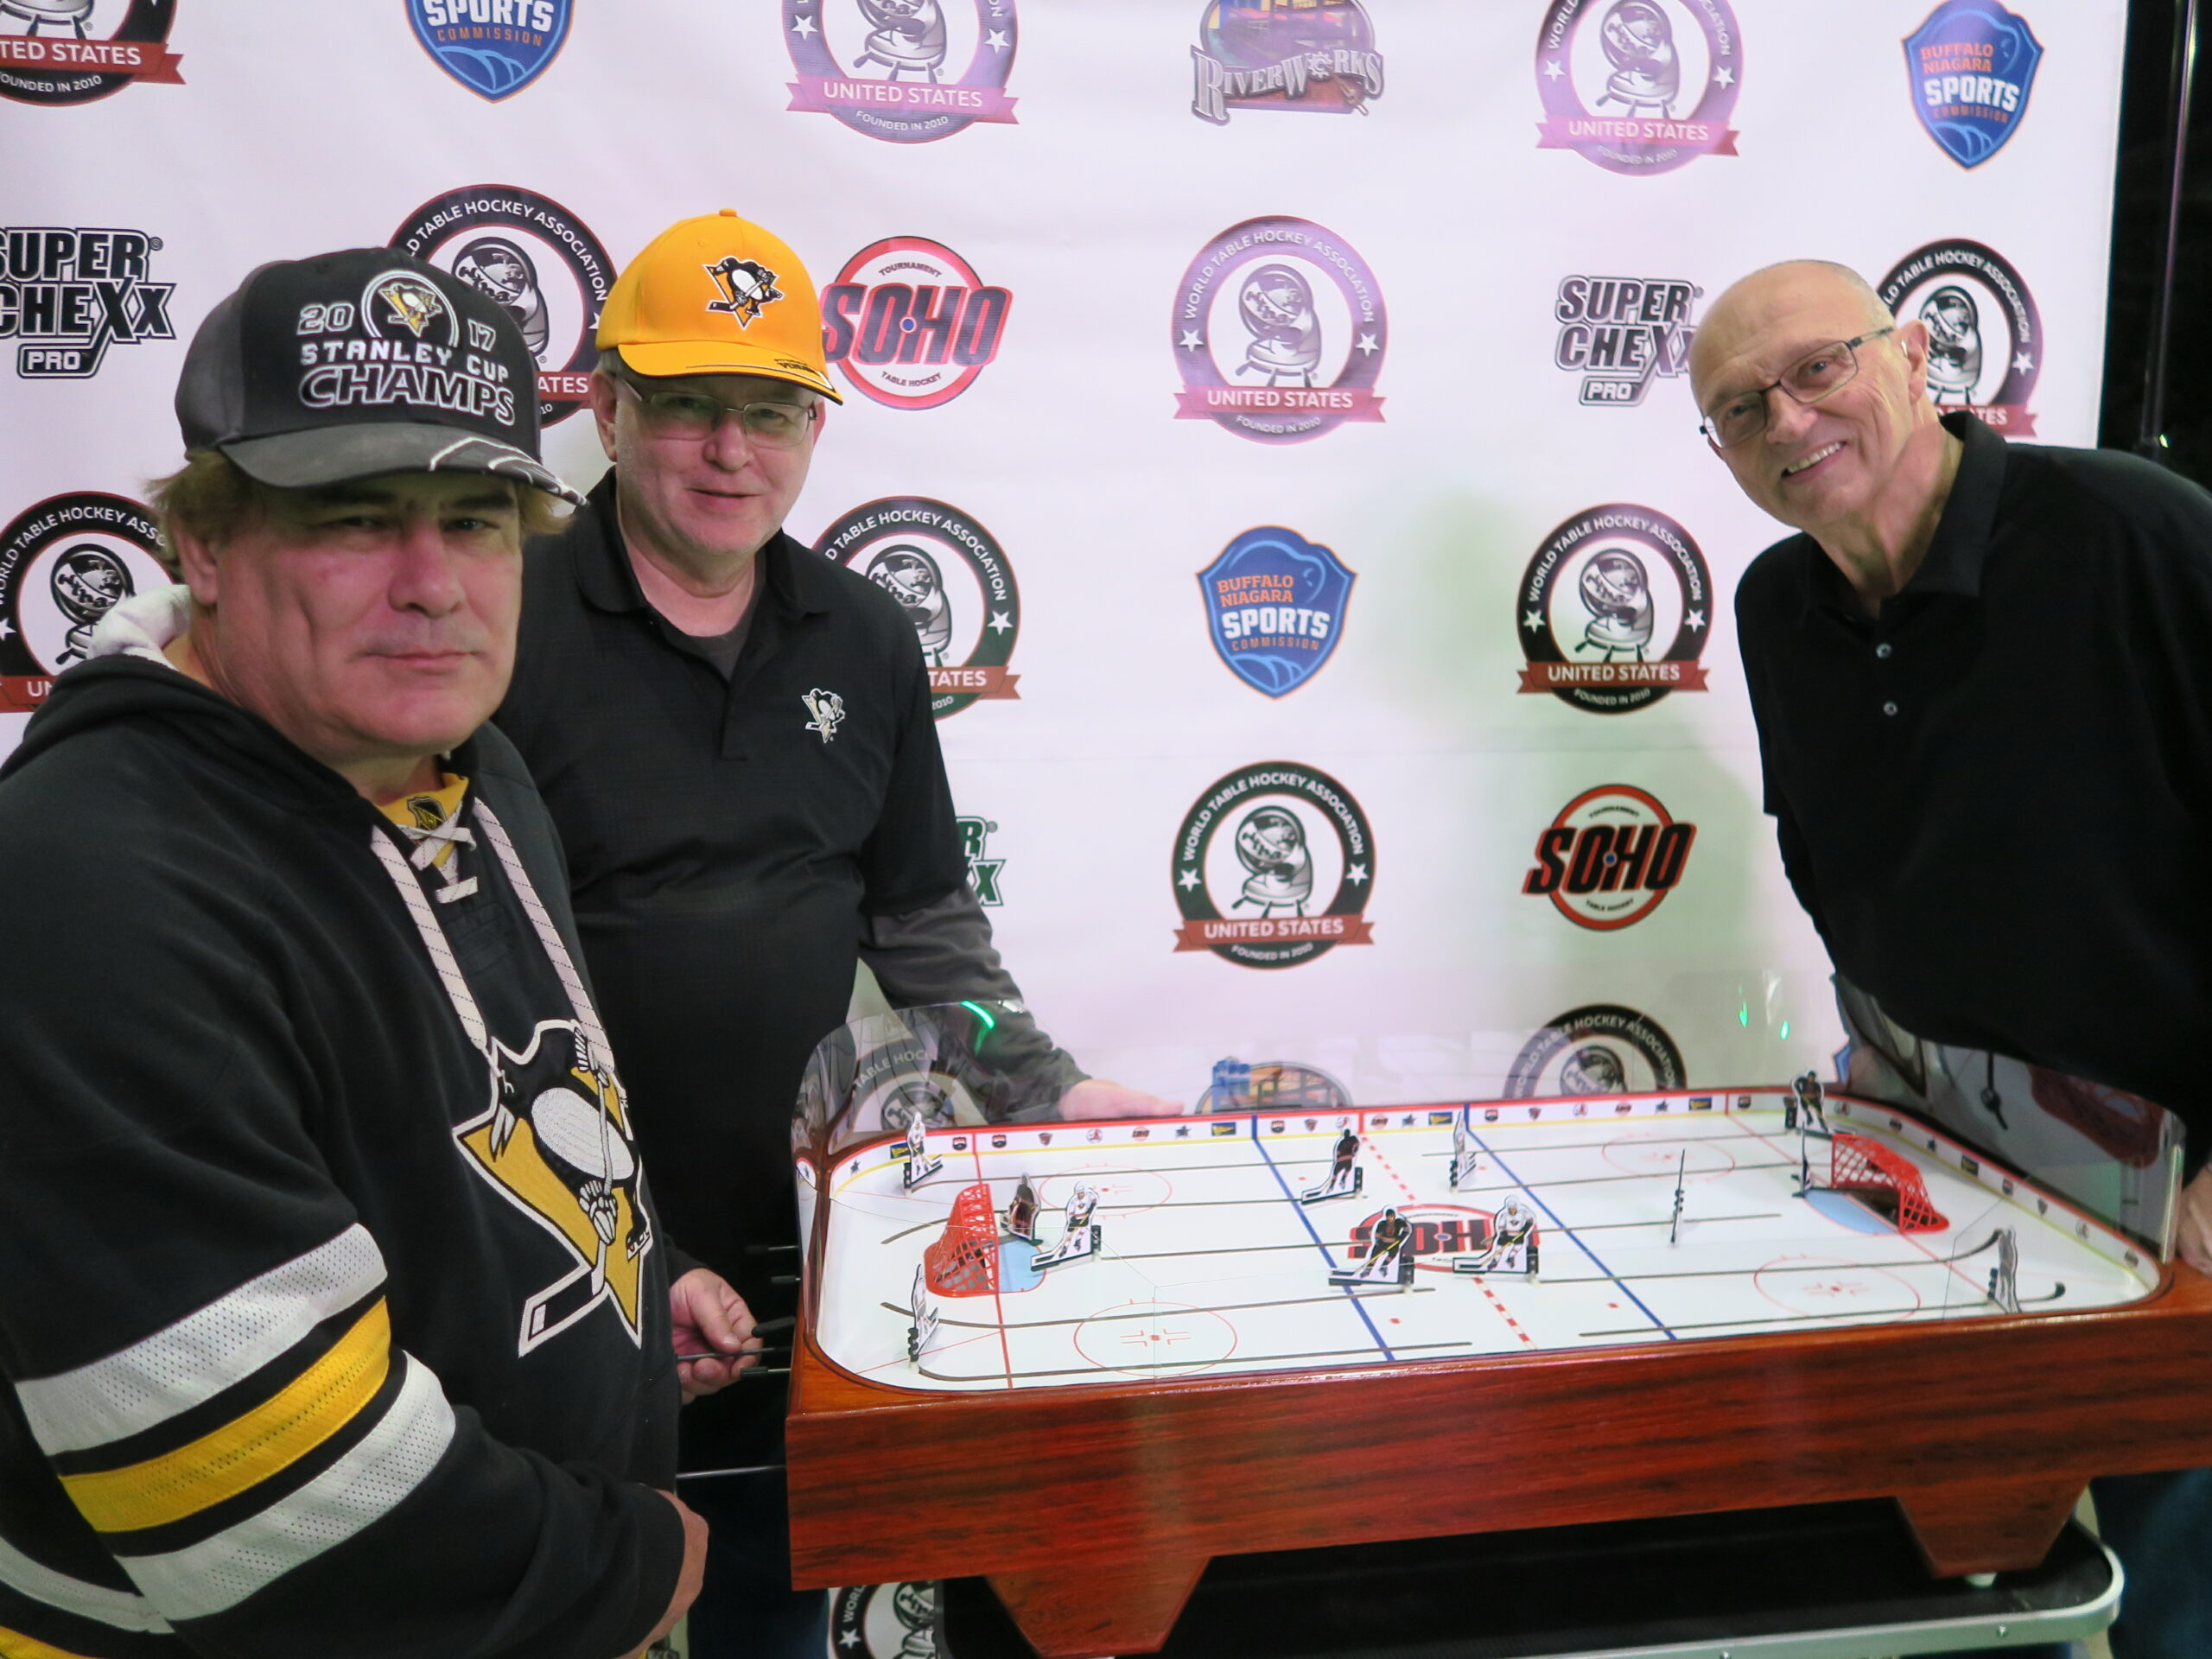 NHL Alumnus, Don Luce, Buffalo Sabres playing SoHo Table Hockey against two fans from Pittsburgh